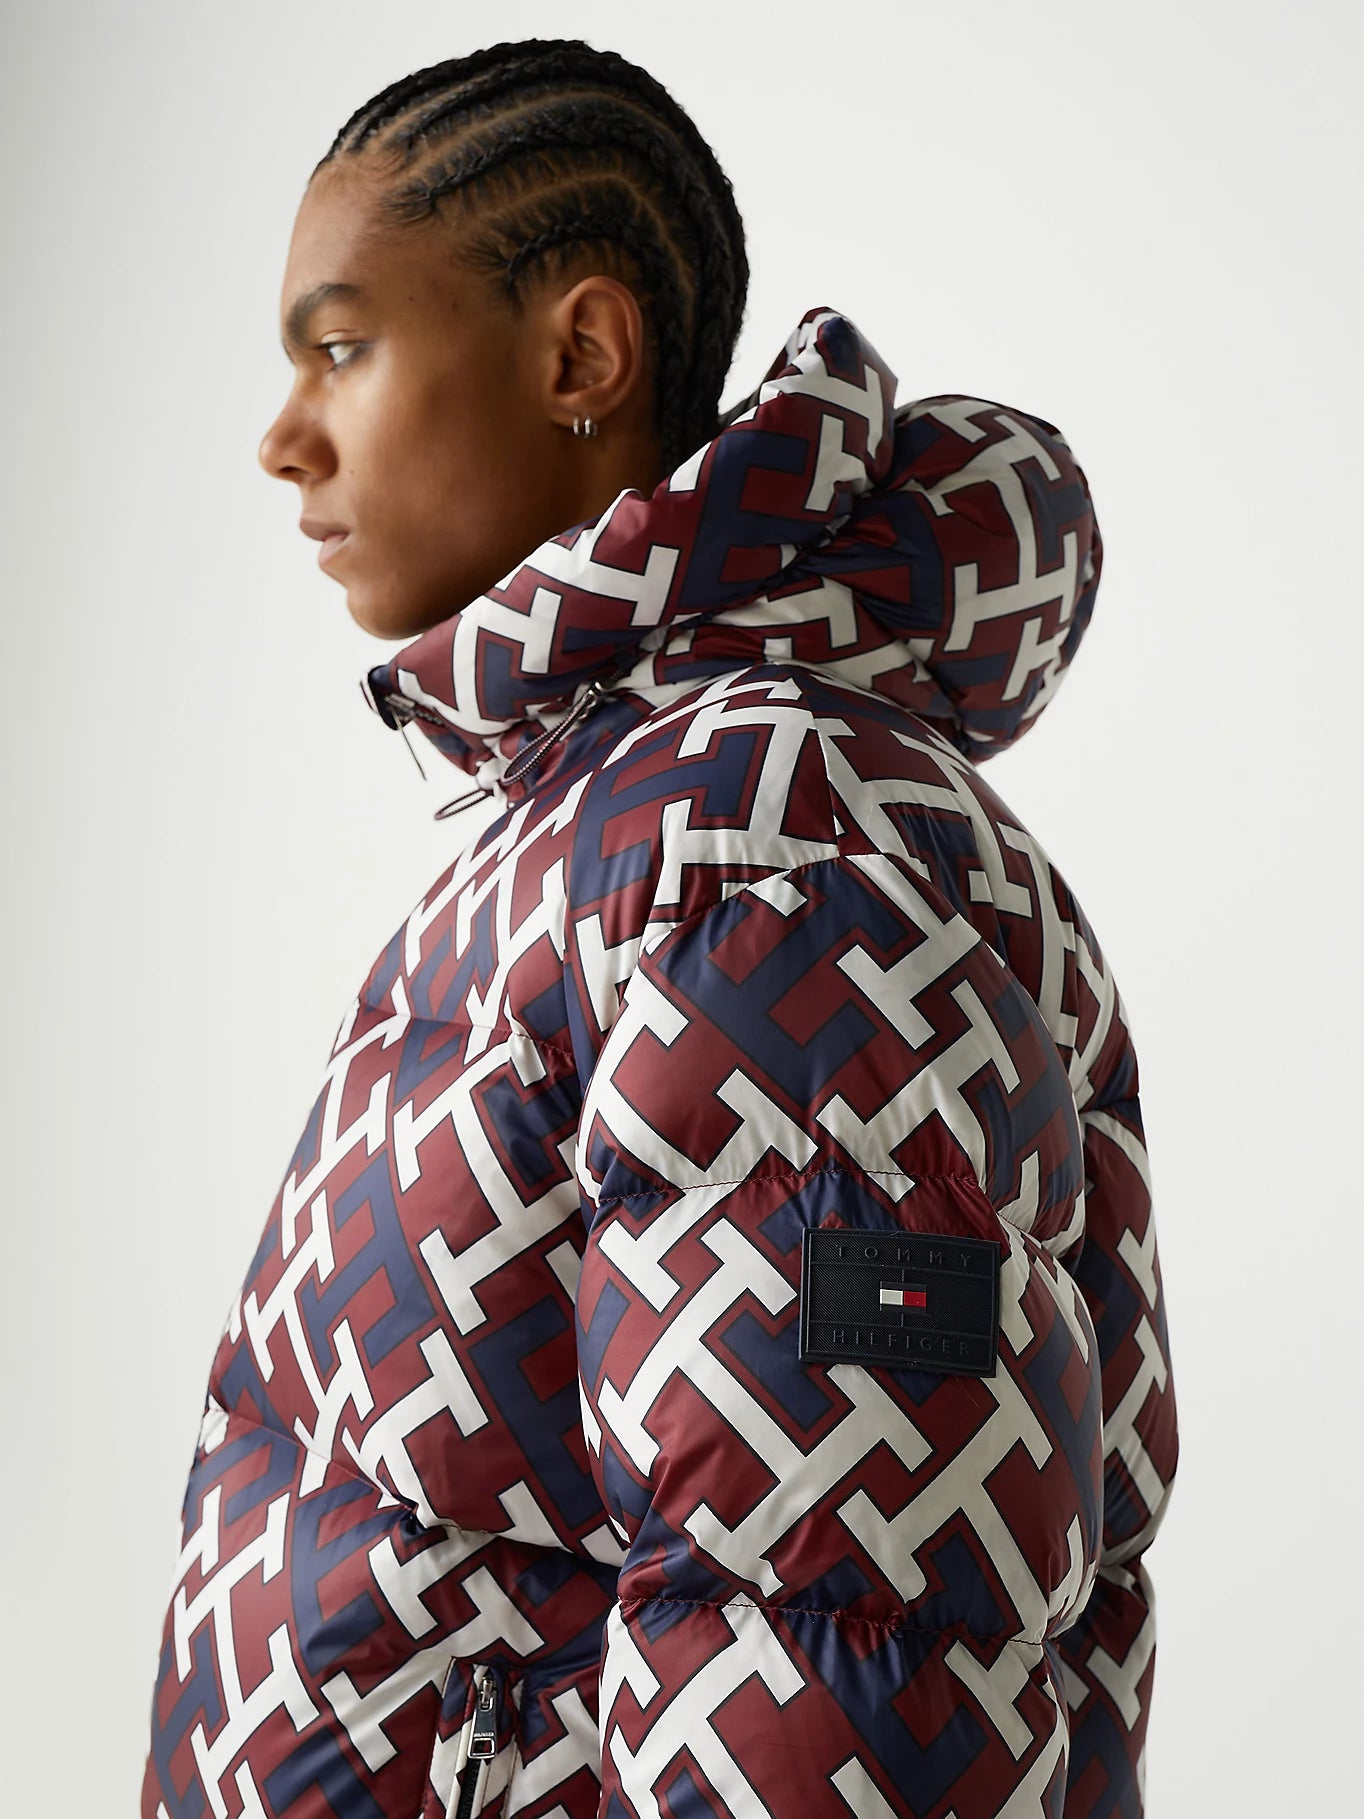 Reversible Monogram Puffer Jacket - Luxury Outerwear and Coats